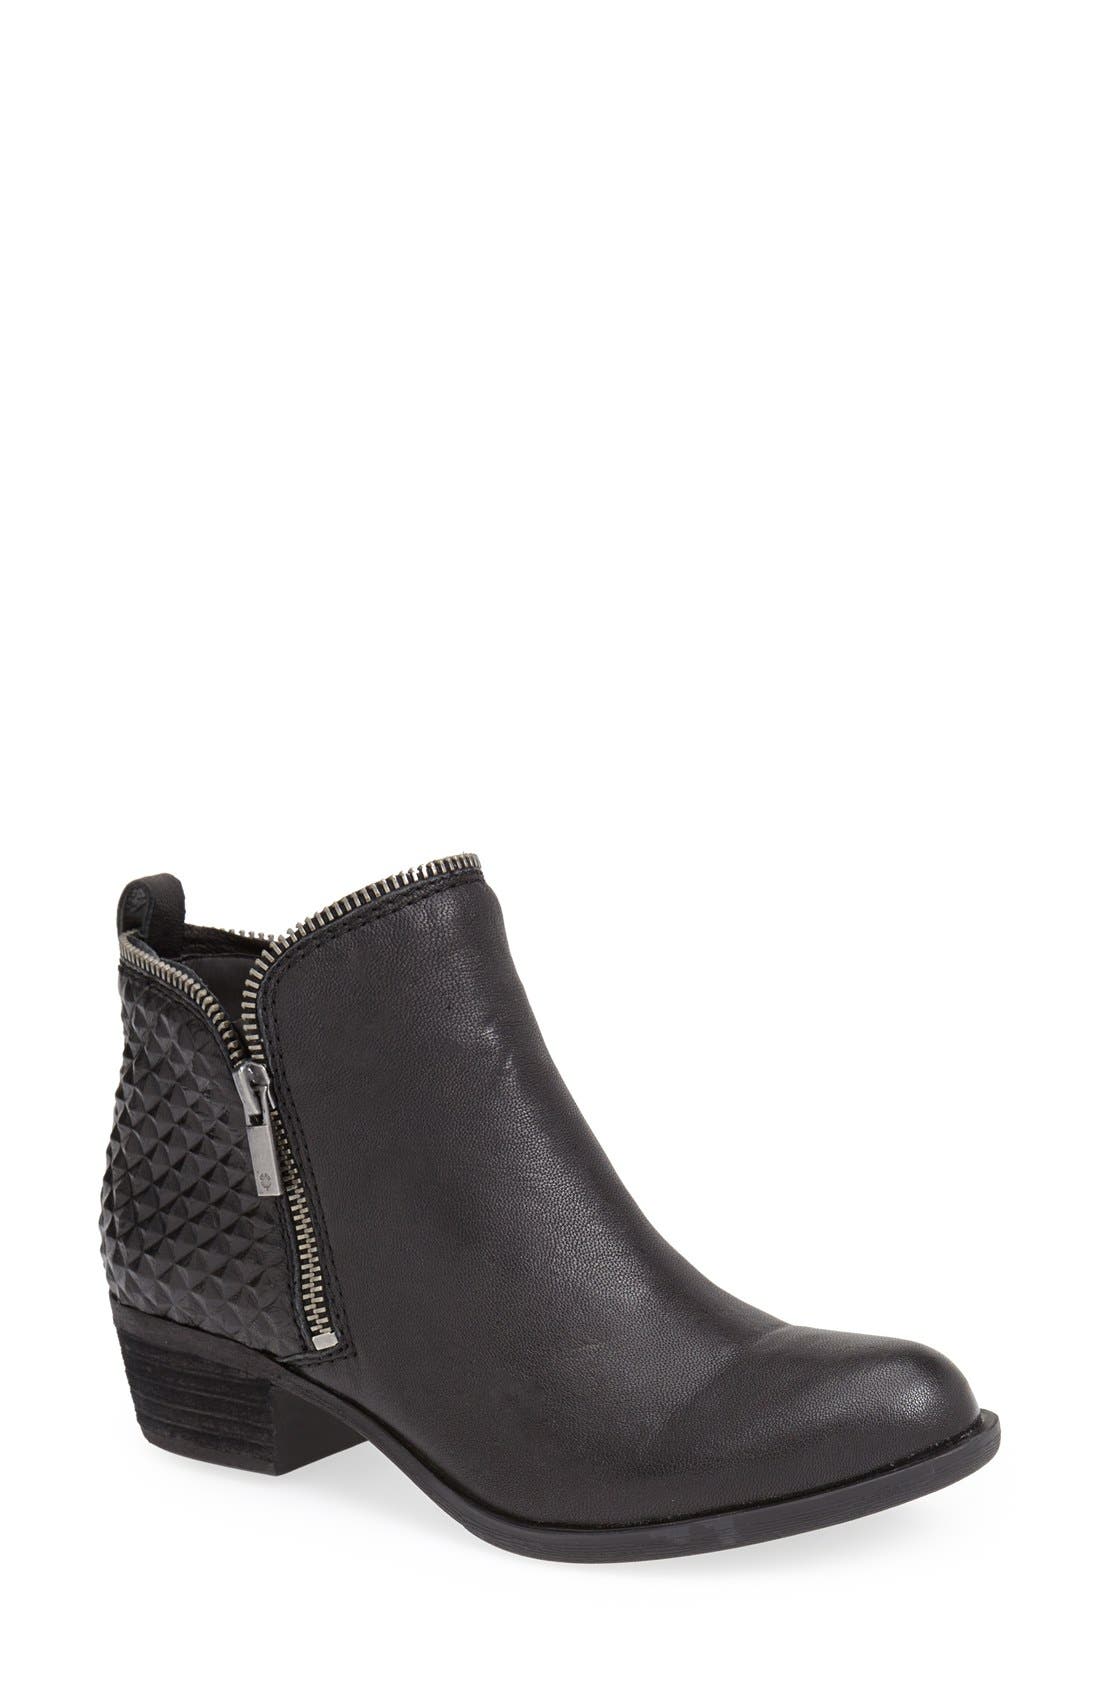 lucky brand bartalino ankle boot